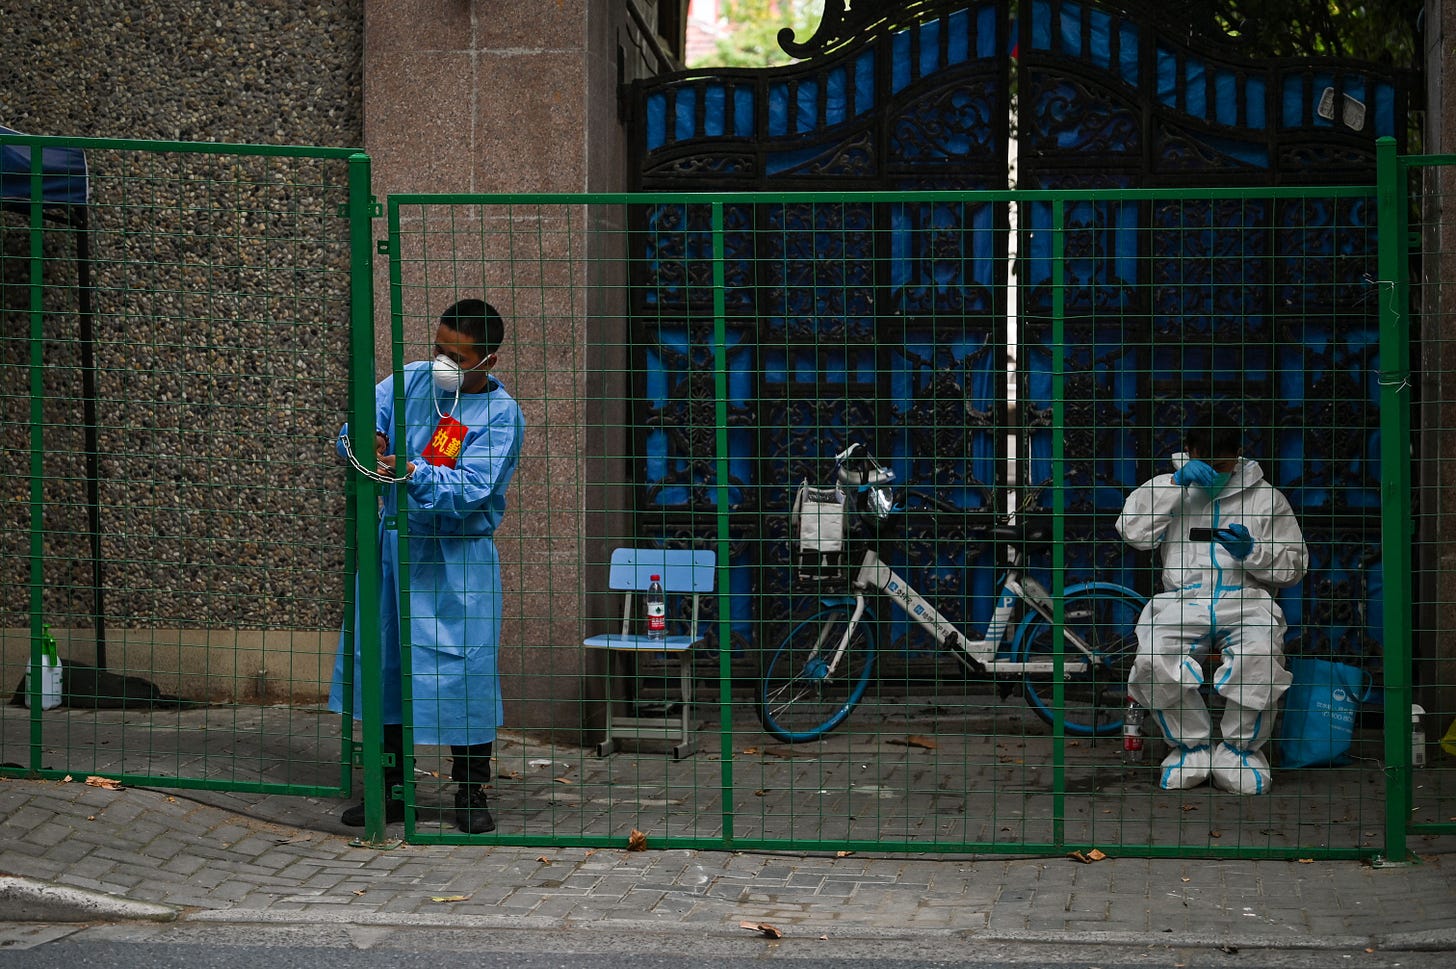 A worker wearing protective gear padlocks a fence to secure a residential area under a Covid-19 lockdown in the Xuhui district of Shanghai on June 16, 2022. (Photo by Hector RETAMAL / AFP) (Photo by HECTOR RETAMAL/AFP via Getty Images)